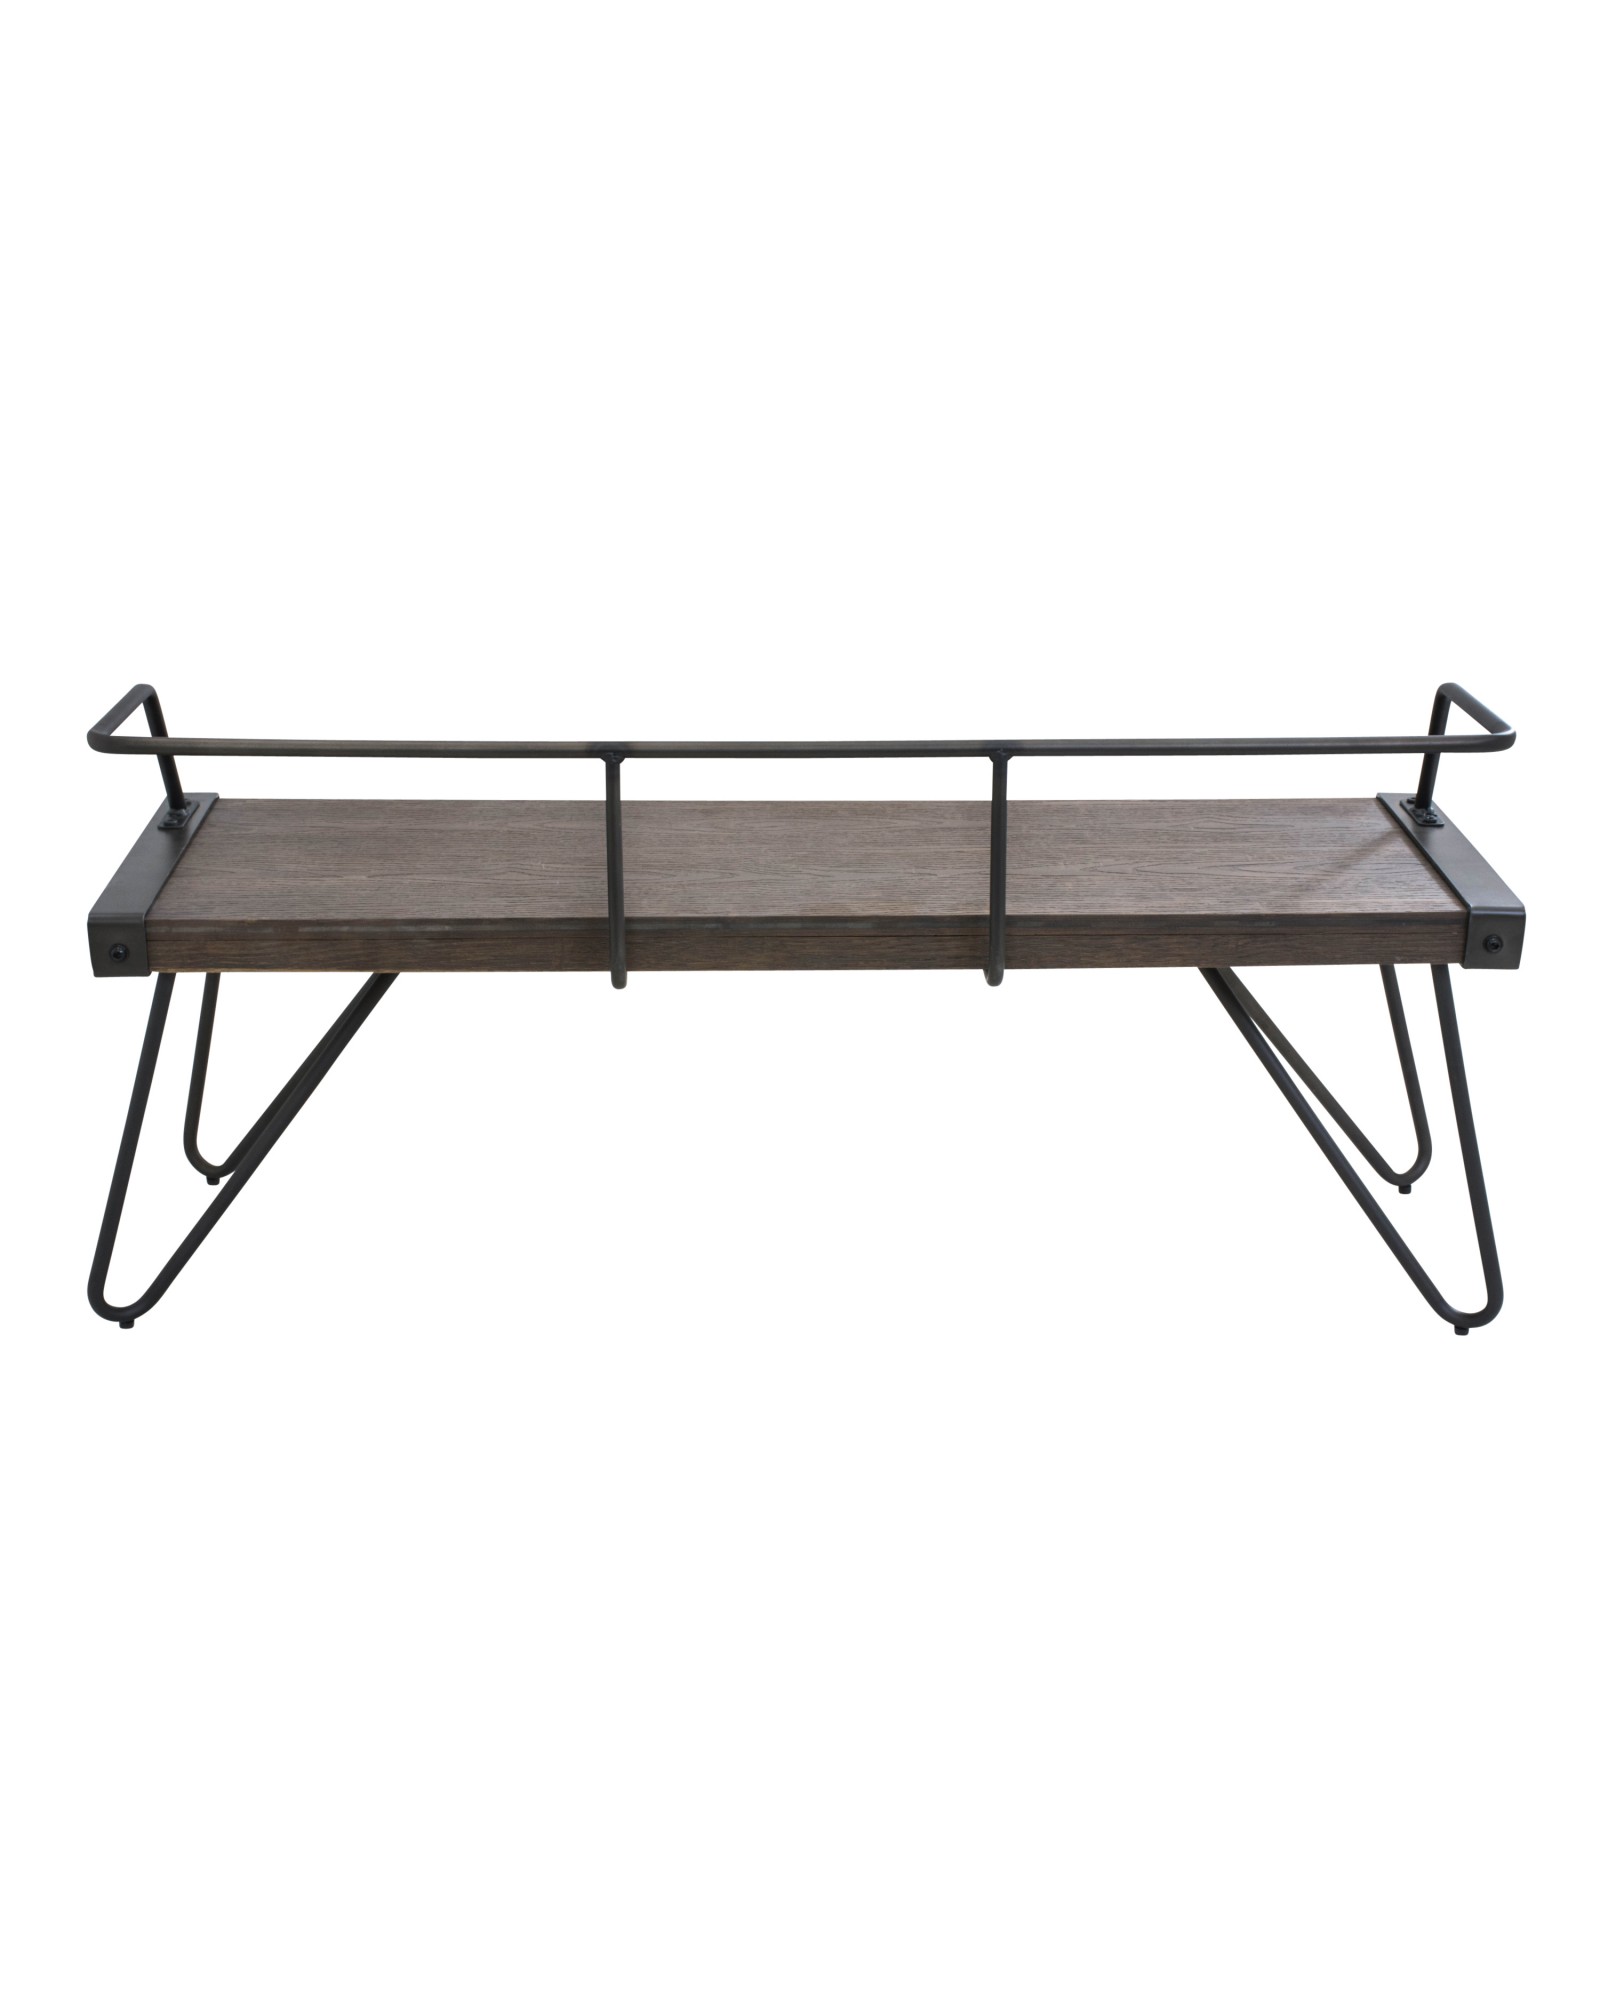 Stefani Industrial Bench in Antique and Walnut